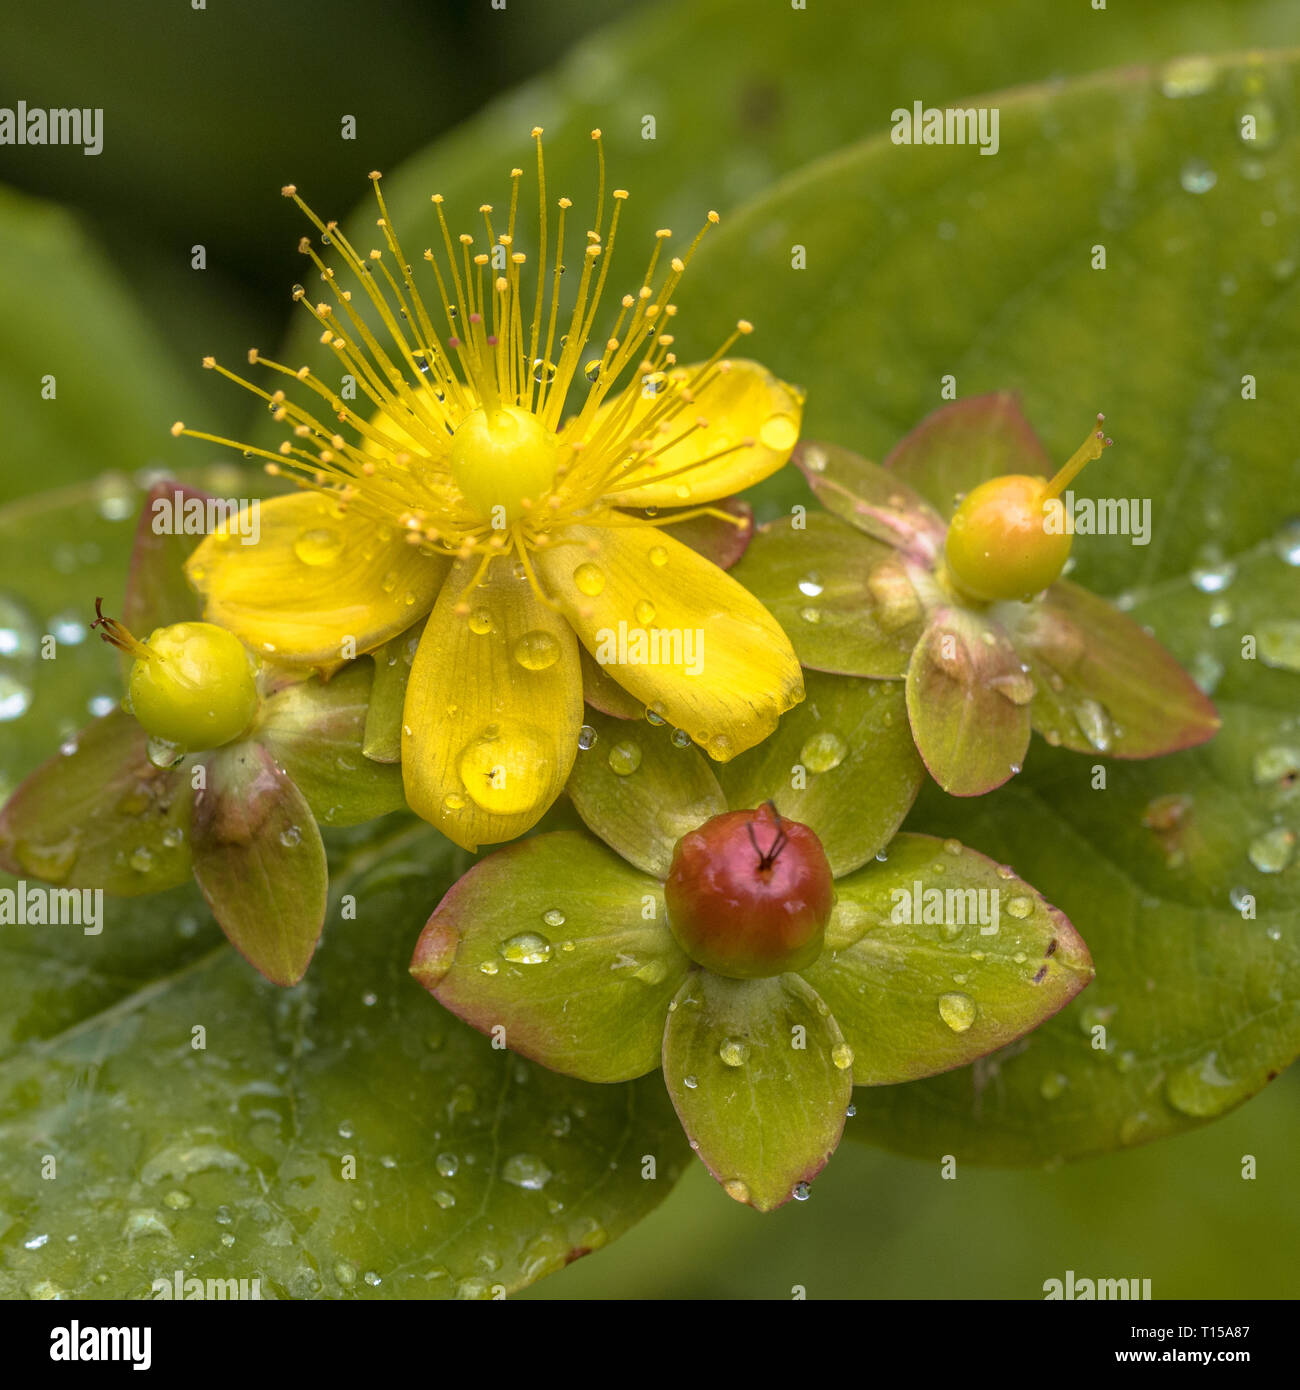 Yellow Hypericum flower with seed capsule and dew drops Stock Photo